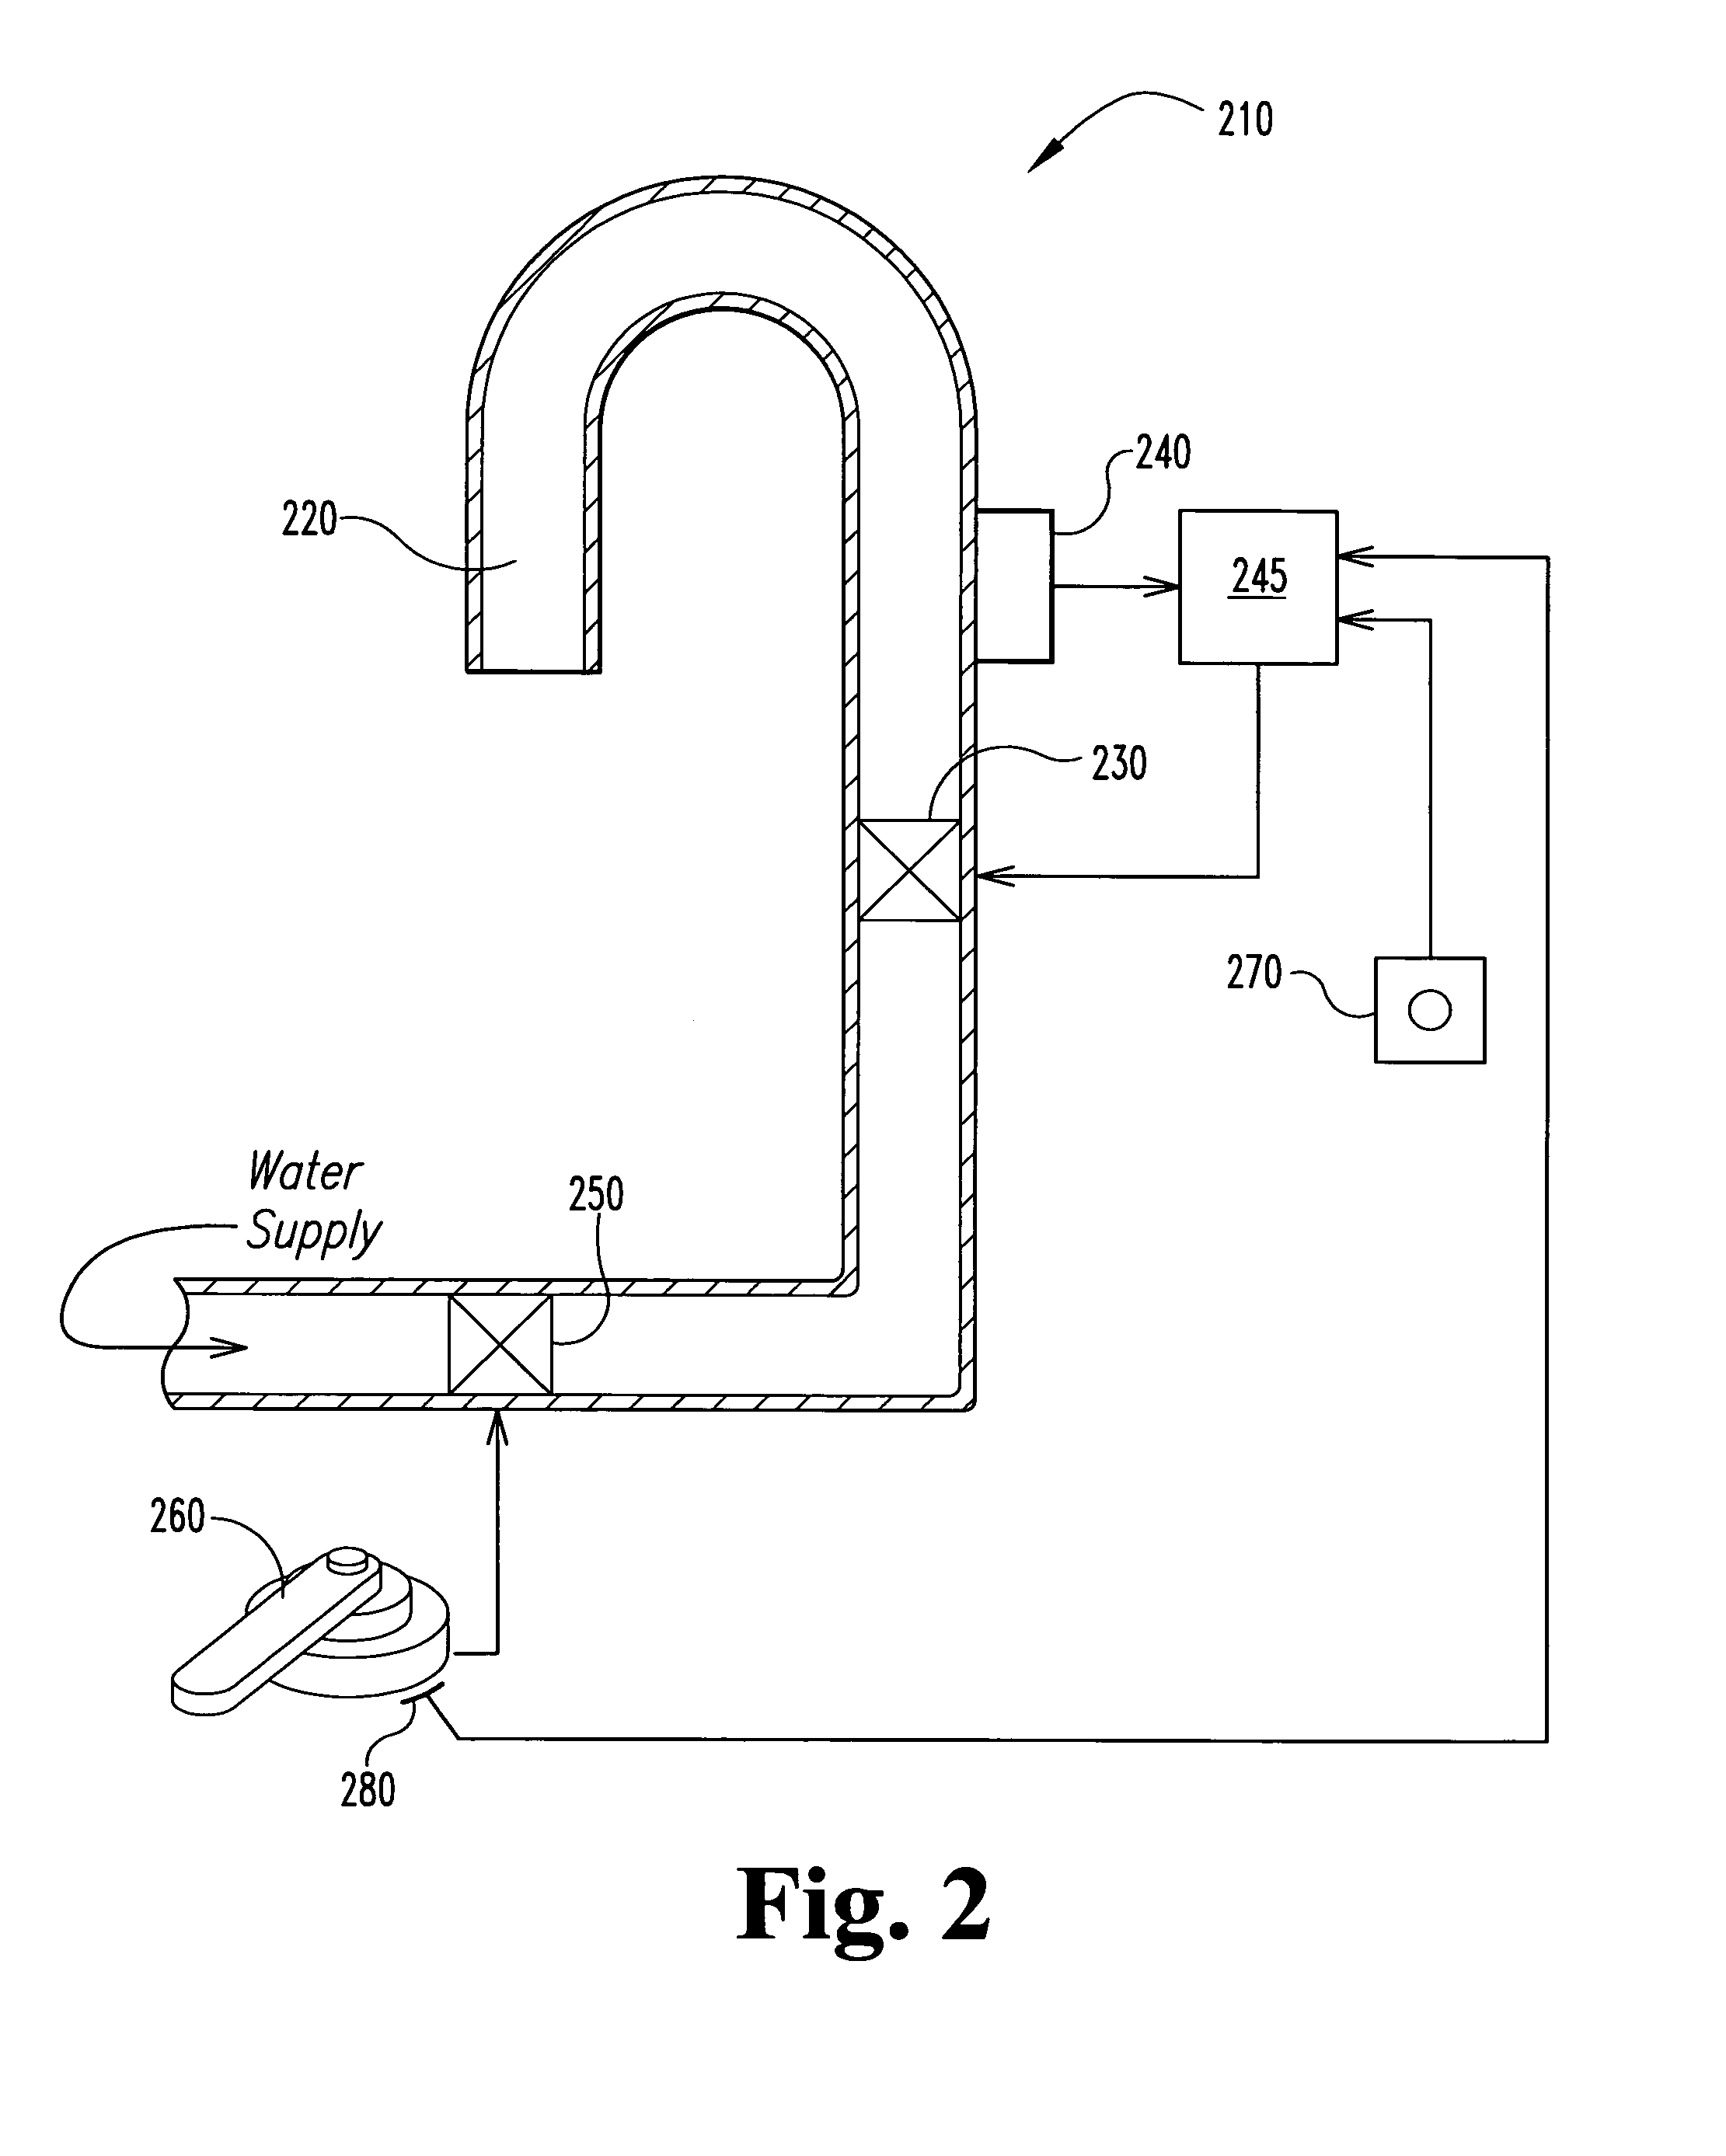 Capacitive touch on/off control for an automatic residential faucet